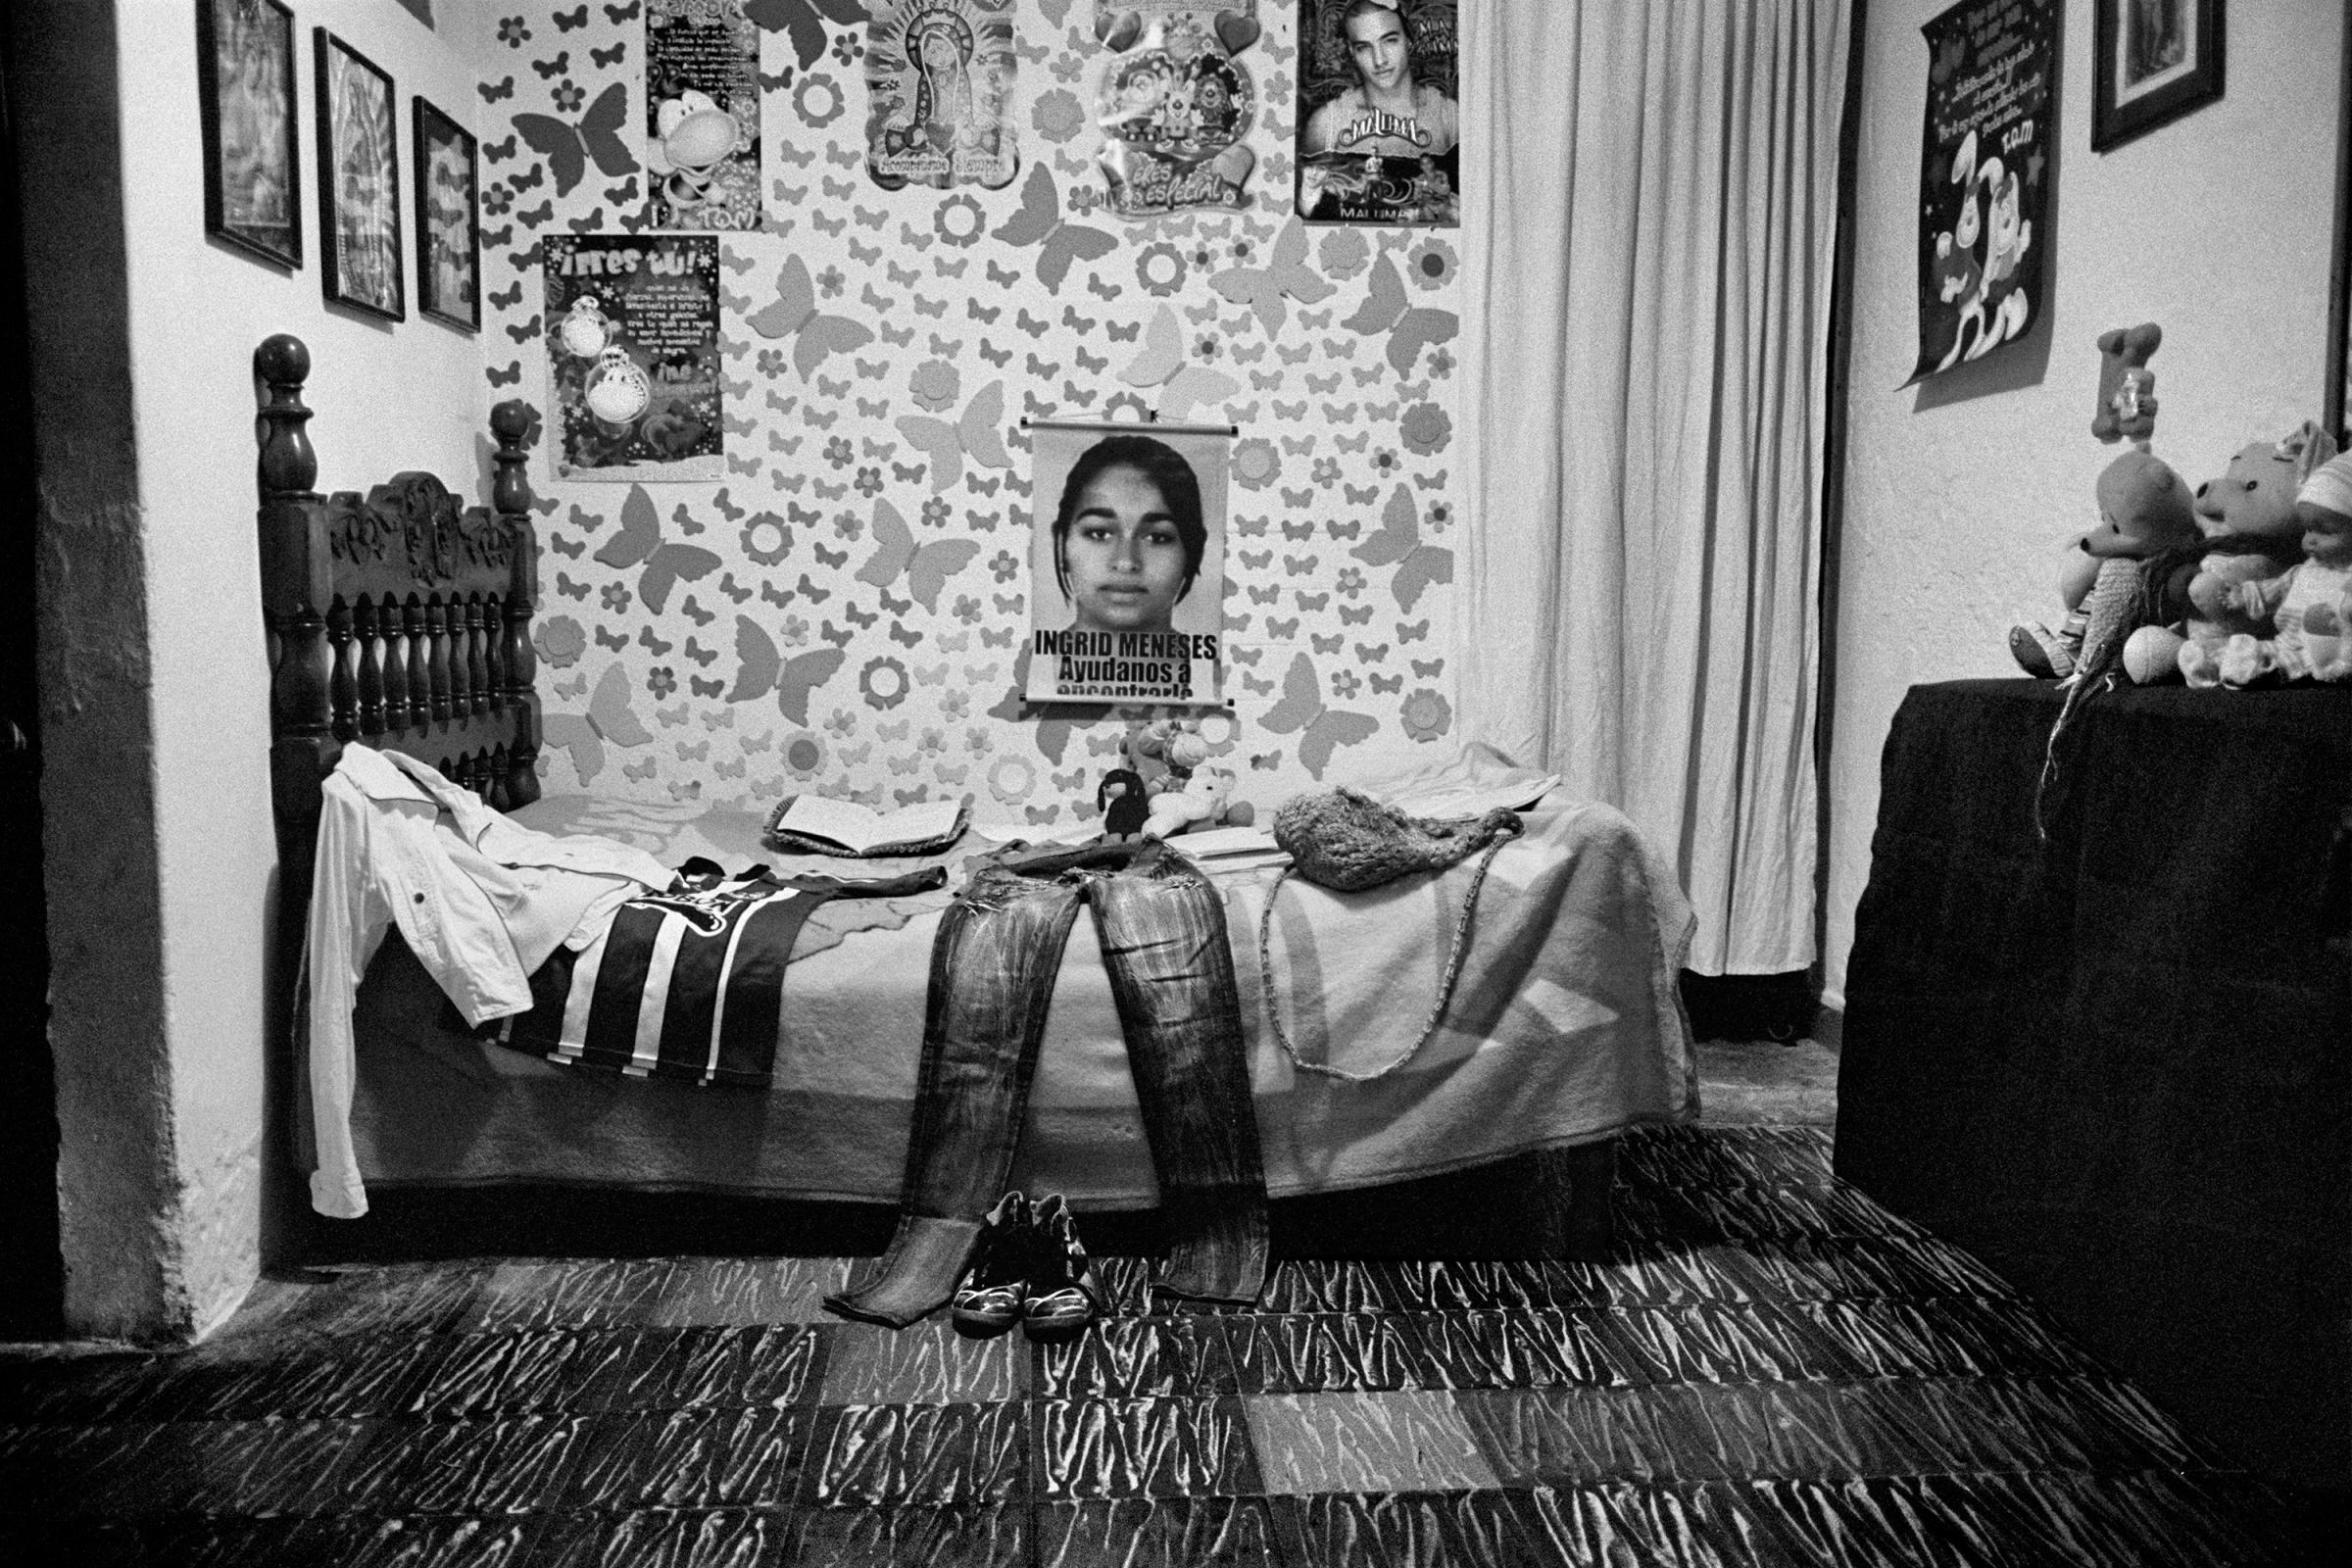 The bed of Ingrid Medarno Perez who disappeared in Yarumal, Colombia has become a shrine inside the family home of Martha and Antonio, Ingrid's parents. At eleven in the morning on Nov. 29, 2010, a member of the paramilitary group of the Urabeños went to her home, where she was with her boyfriend. It was not until March 2015, that Julian Bolivar, a former paramilitary commander informed the family that Ingrid and her boyfriend were executed that same day. Their bodies were crushed and thrown into the river. Their remains were never recovered, Feb. 2015.